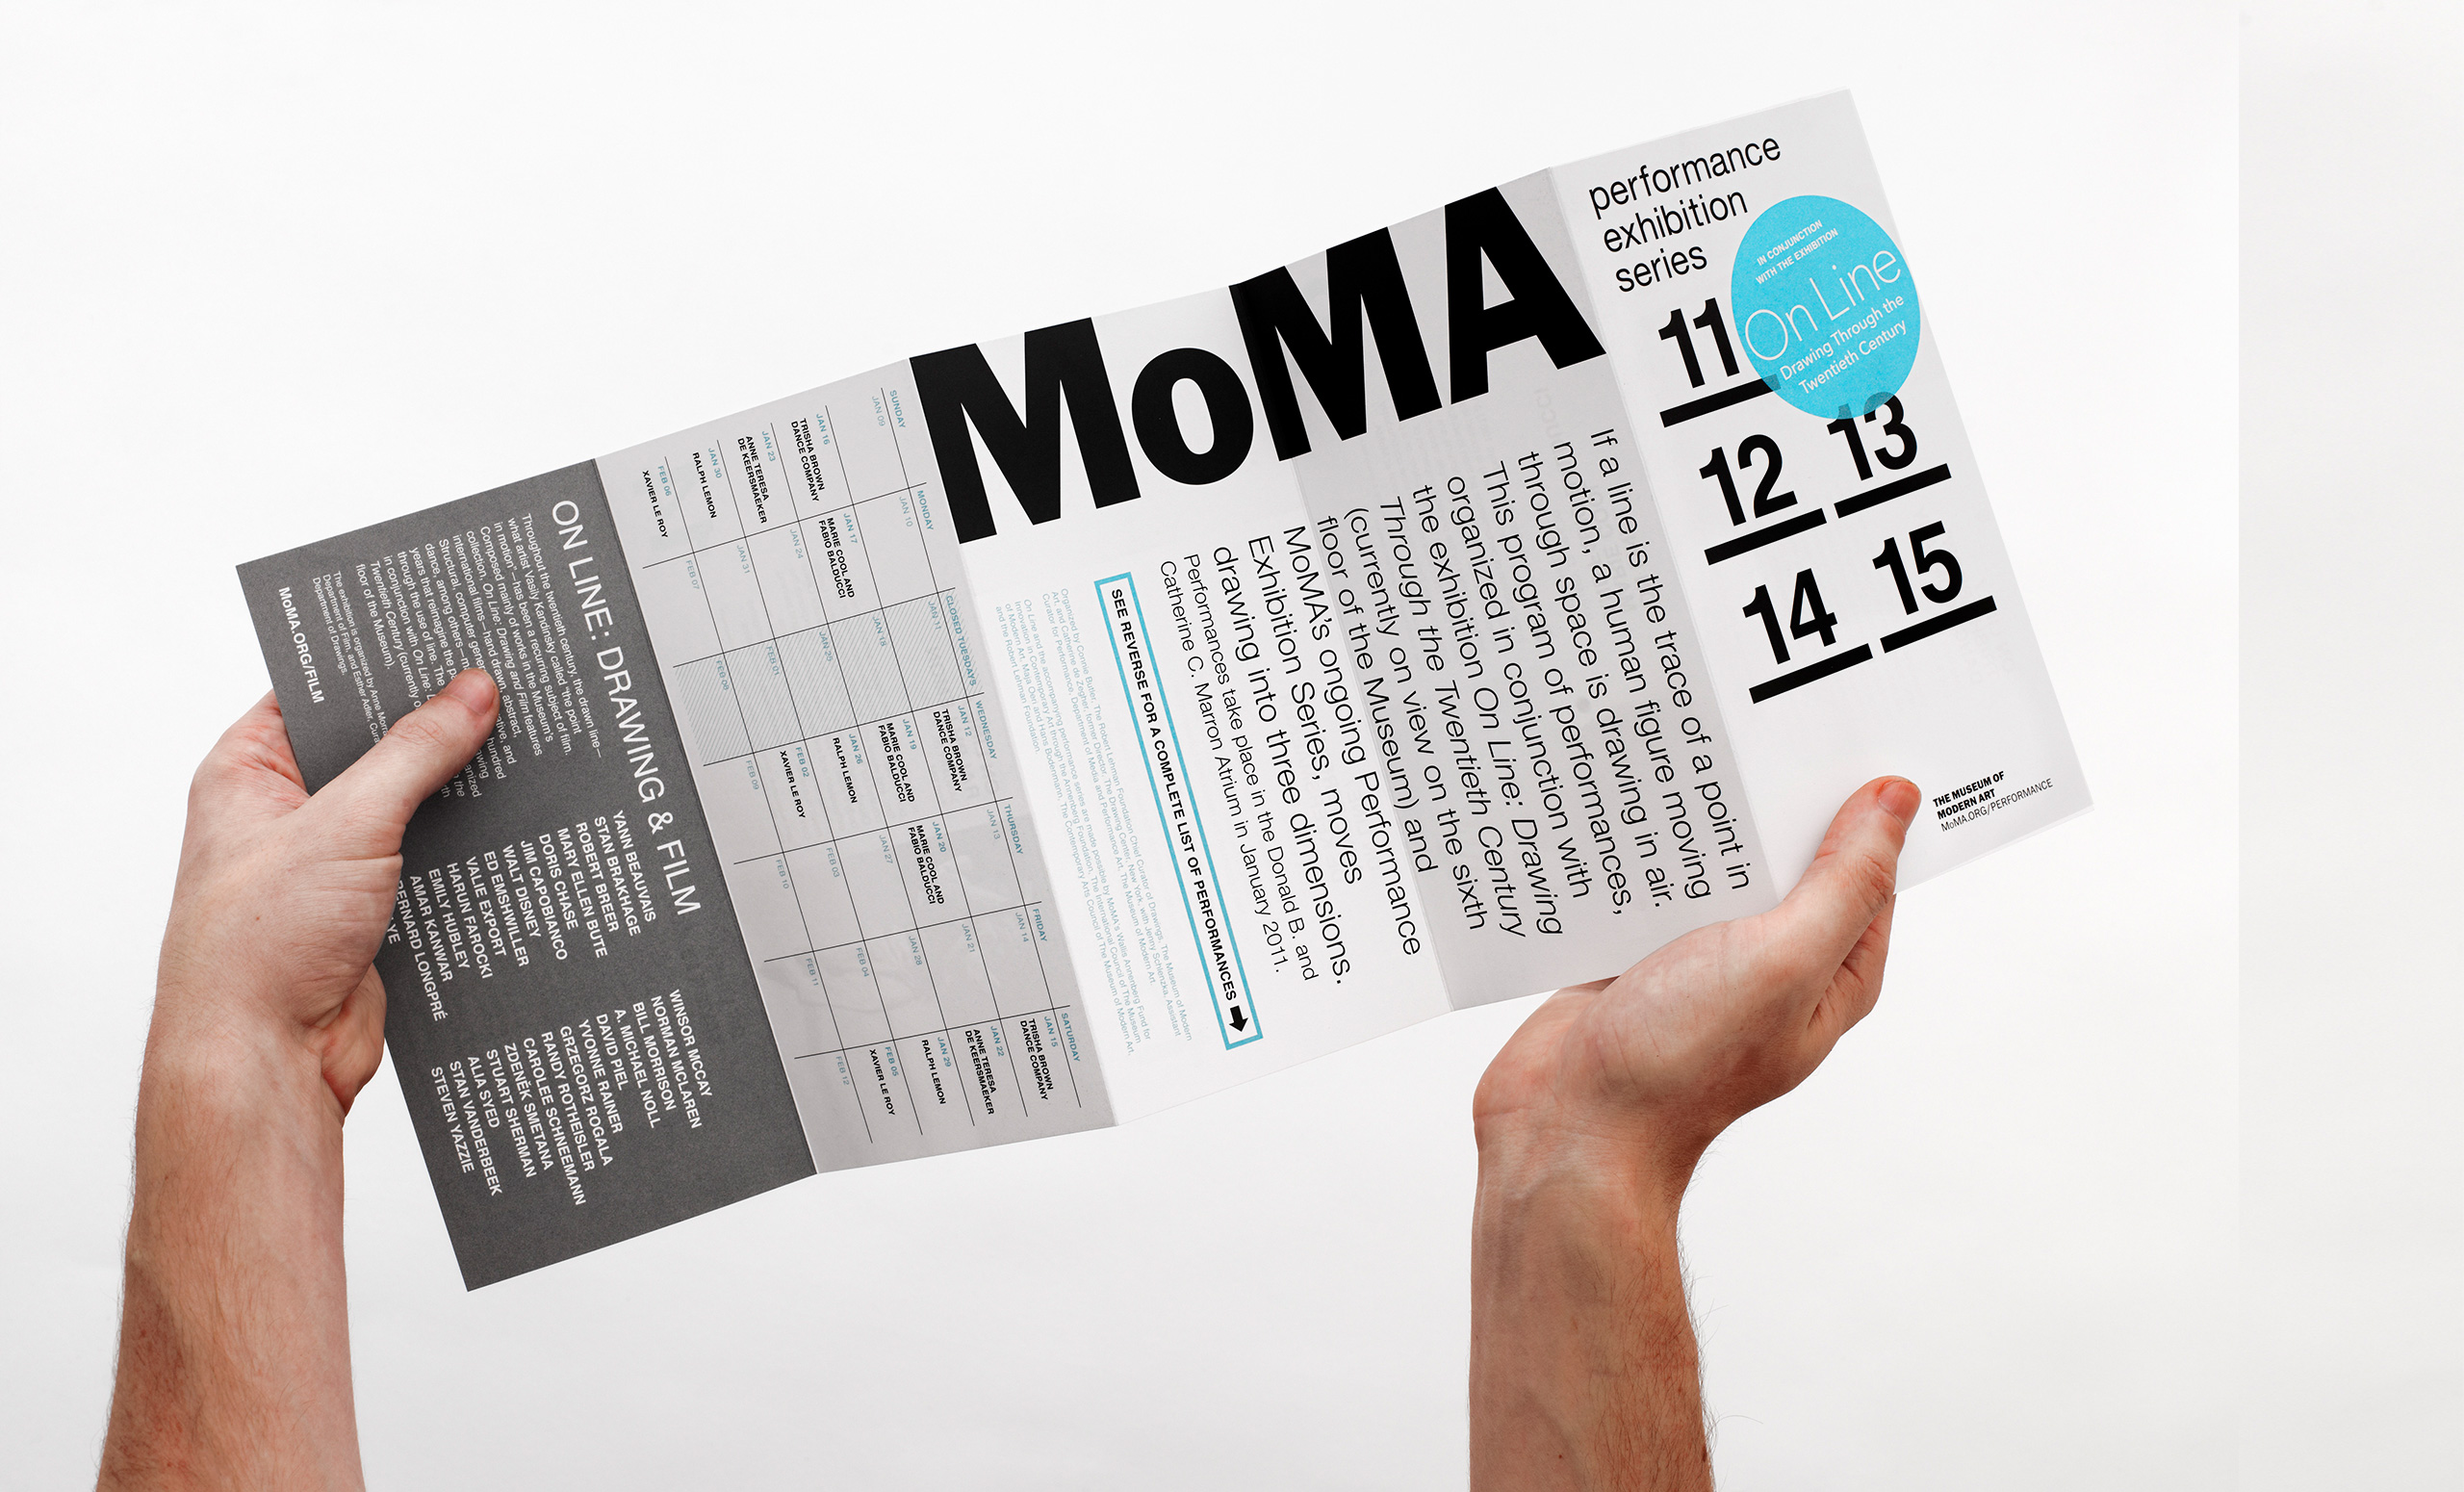 MoMA Performance Exhibition Series flyer